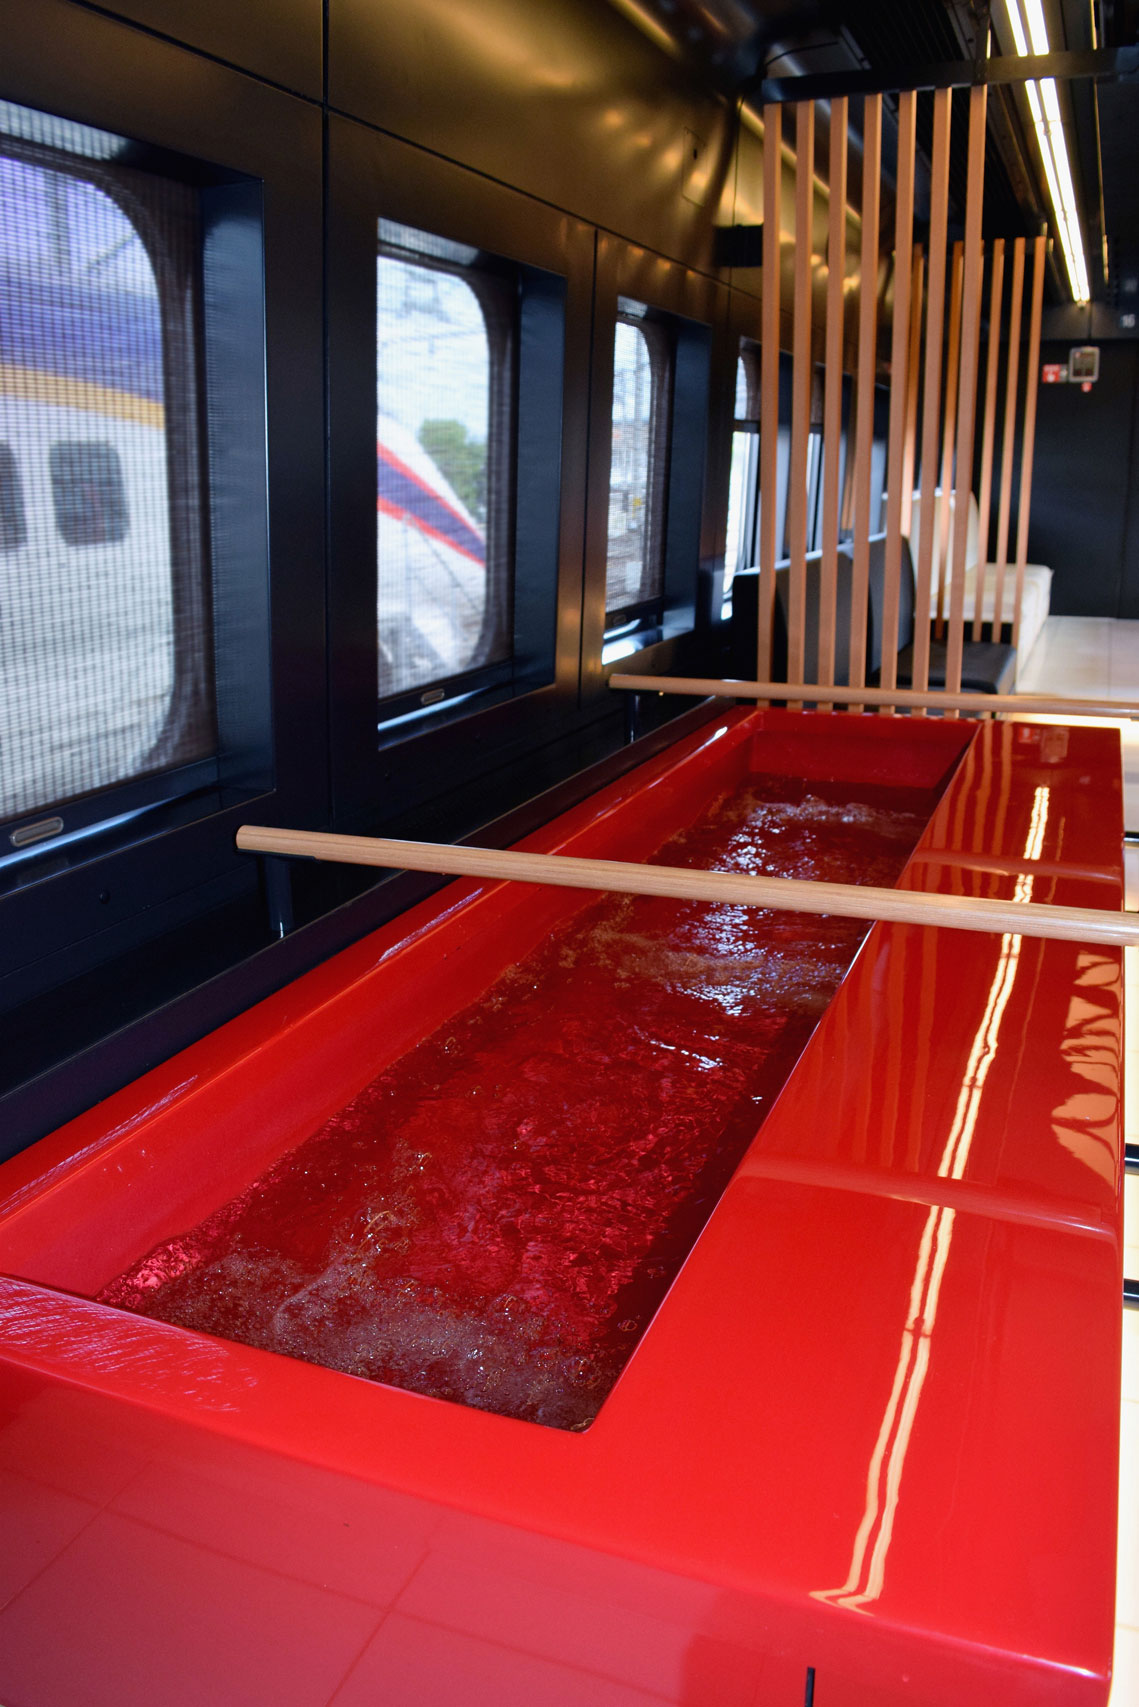 The interior of the footbath car on East Japan Railway Co.'s new 'Toreiyu Tsubasa' train on June 30, 2014 in Yamagata, Japan. Passengers will be able to relieve aching feet with a 2.4-meter-long footbath, and then congregate in a lounge for drinks, on the Yamagata Shinkansen Line starting July 19 for a limited run until September.